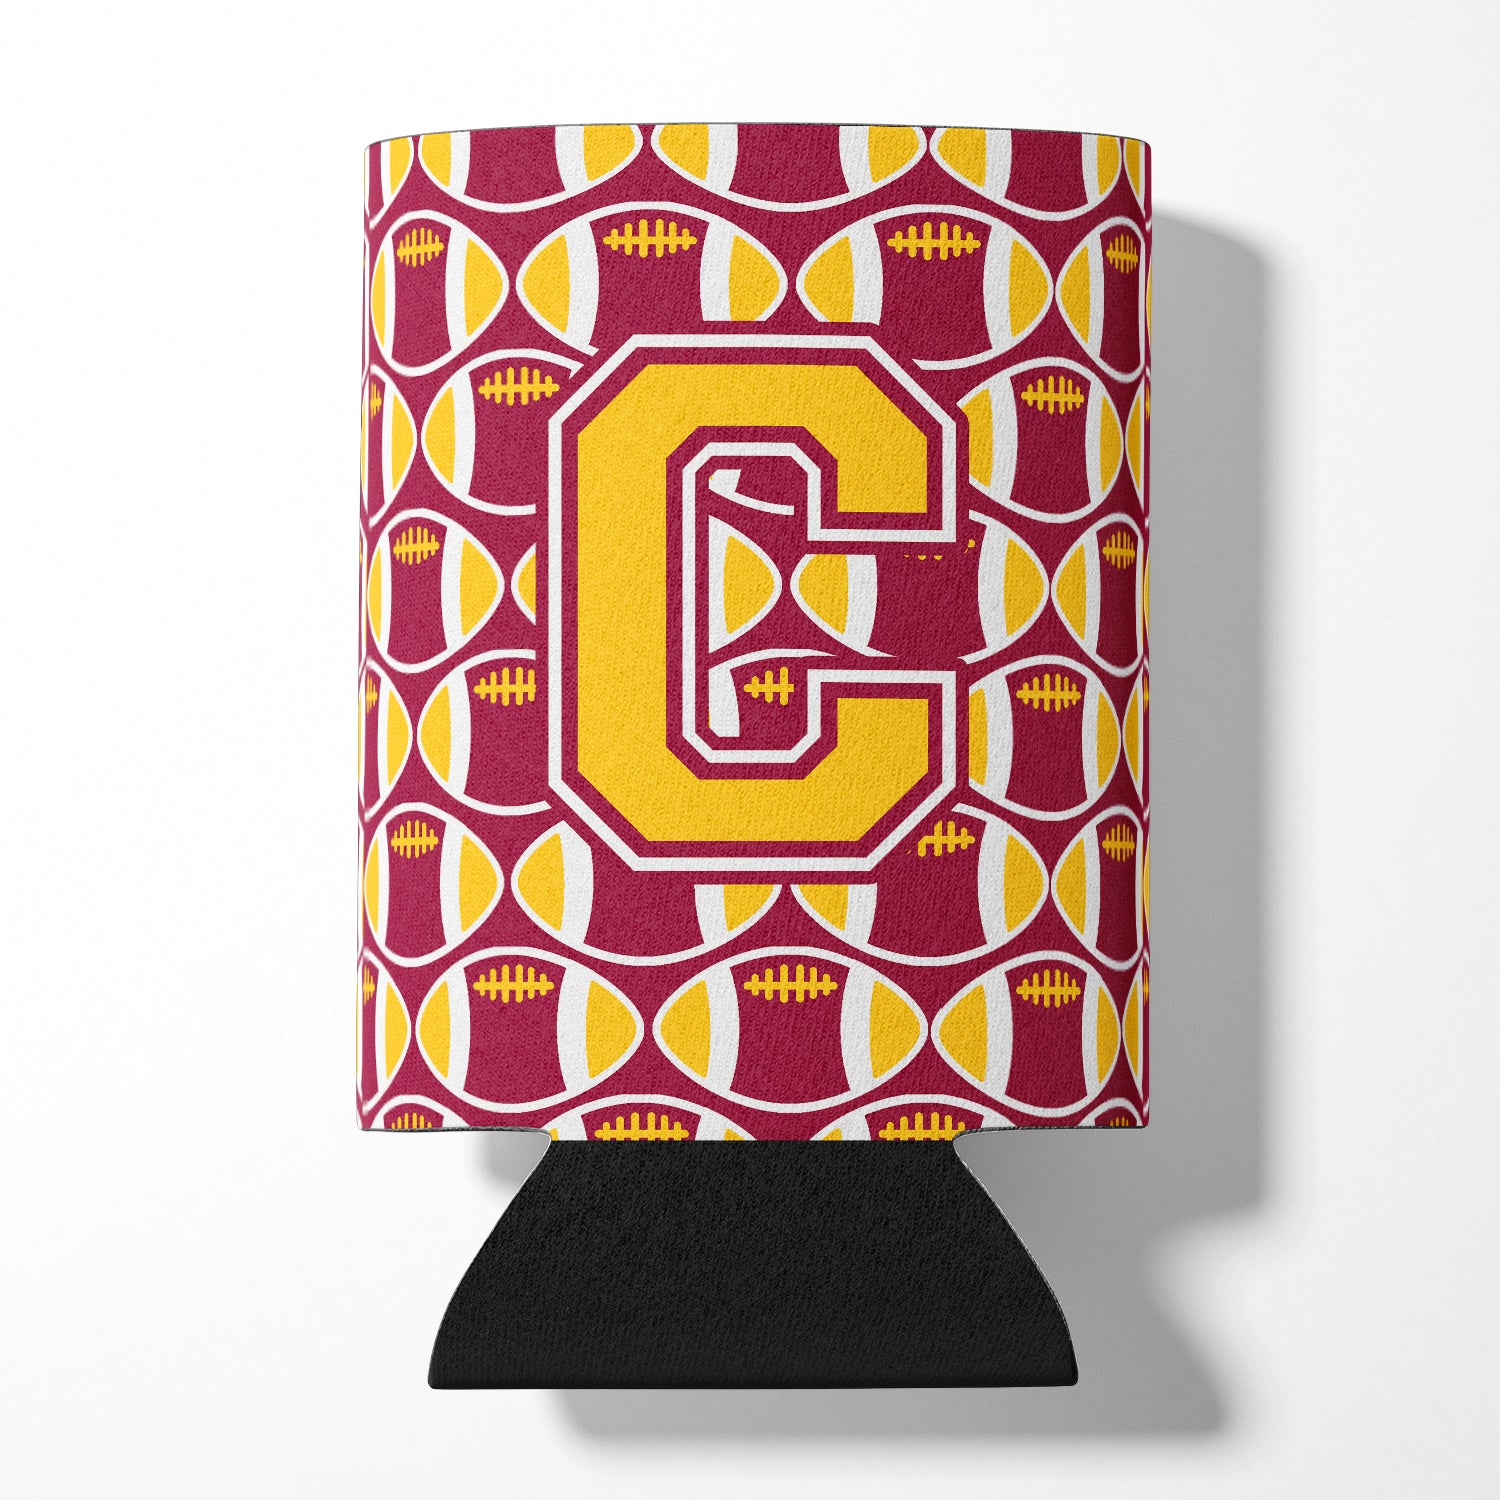 Letter C Football Maroon and Gold Can or Bottle Hugger CJ1081-CCC.